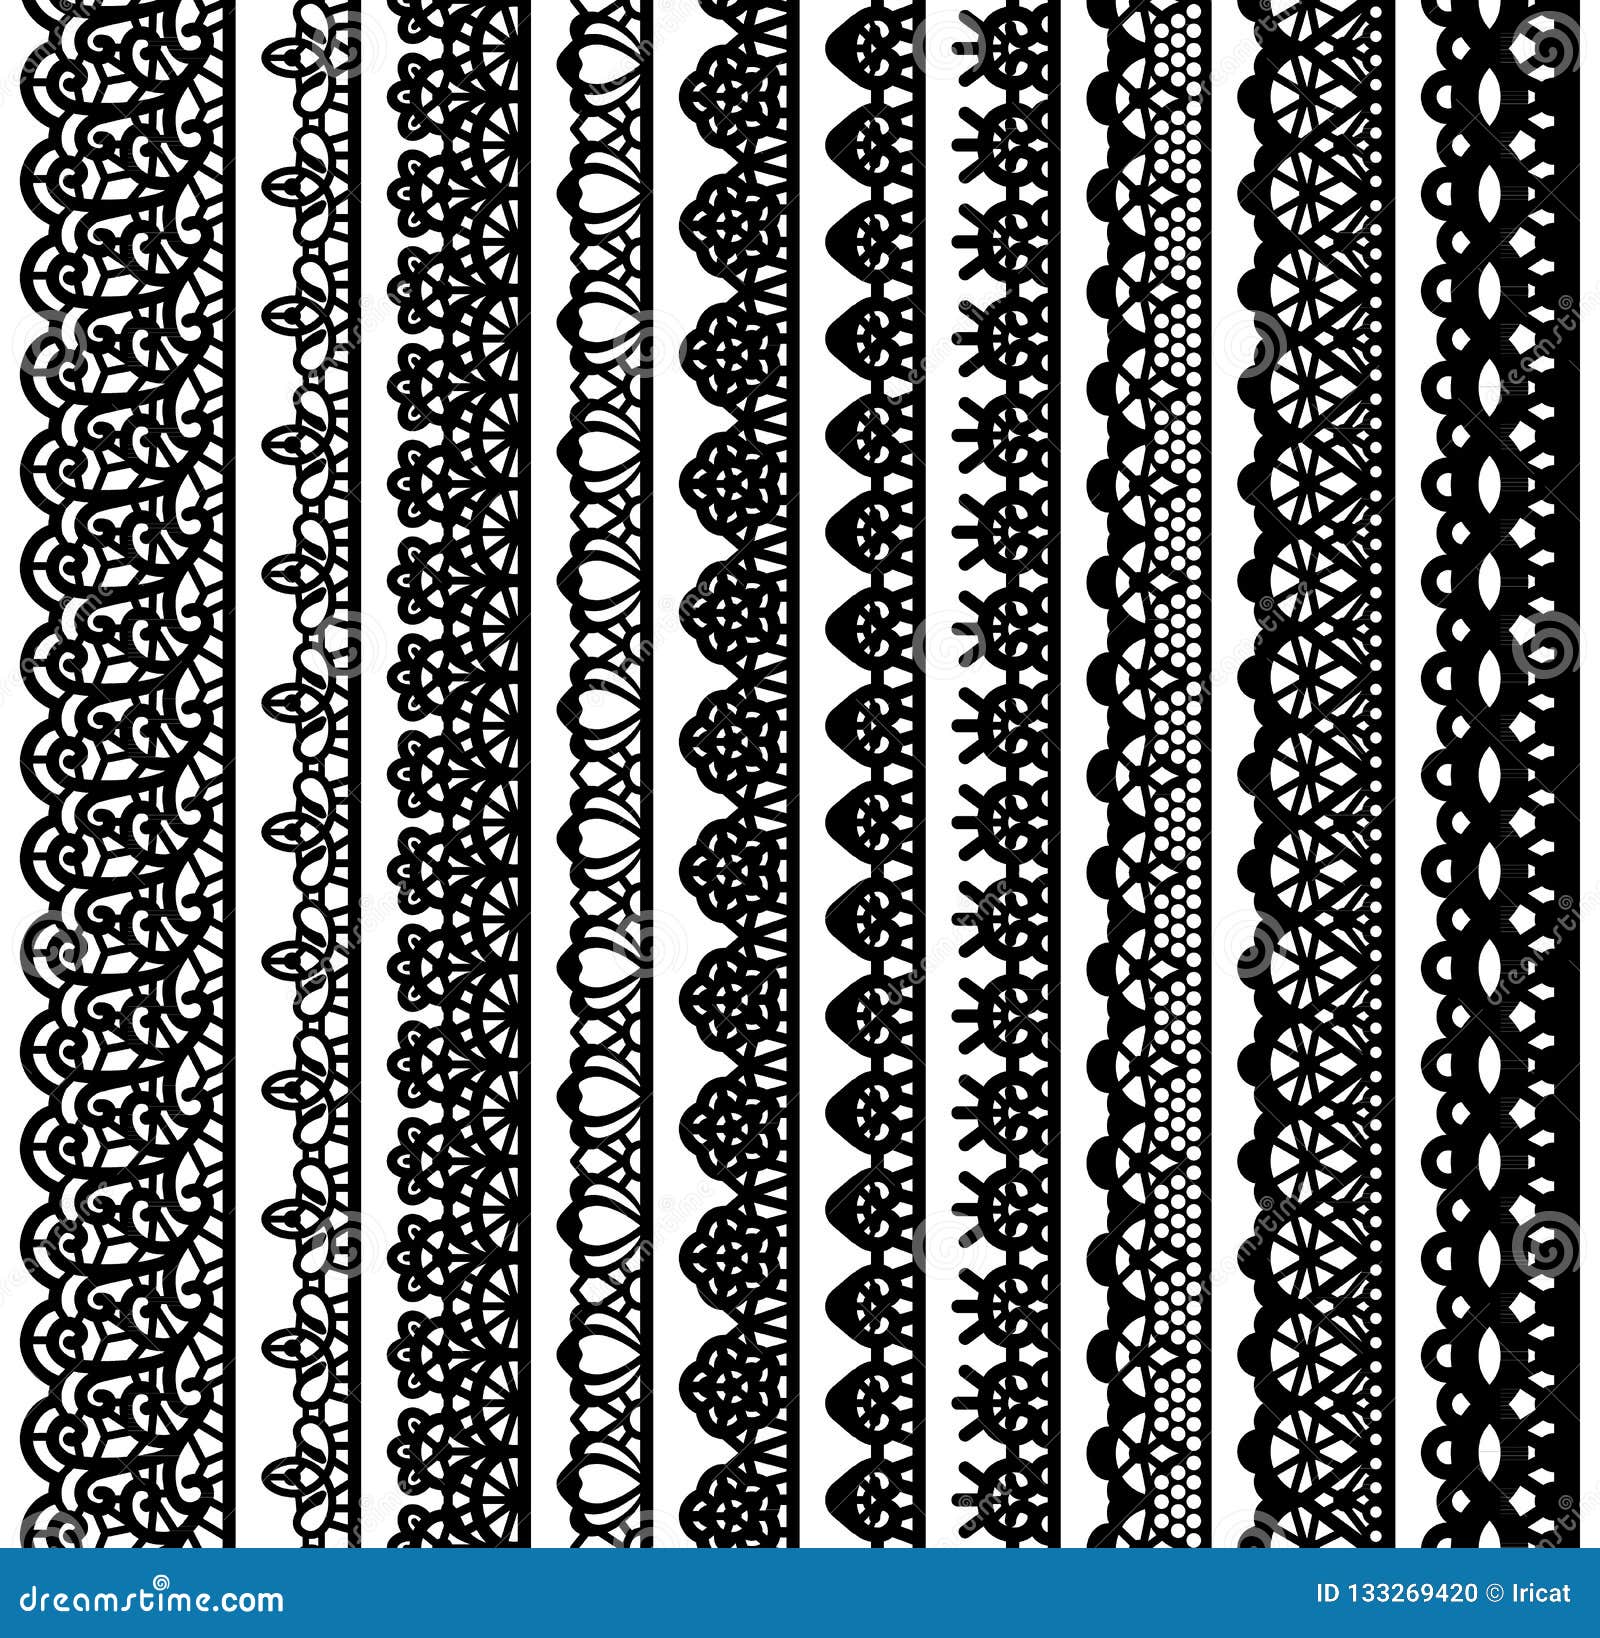 Collection Of Vertical Seamless Borders For Design. Black Lace ...